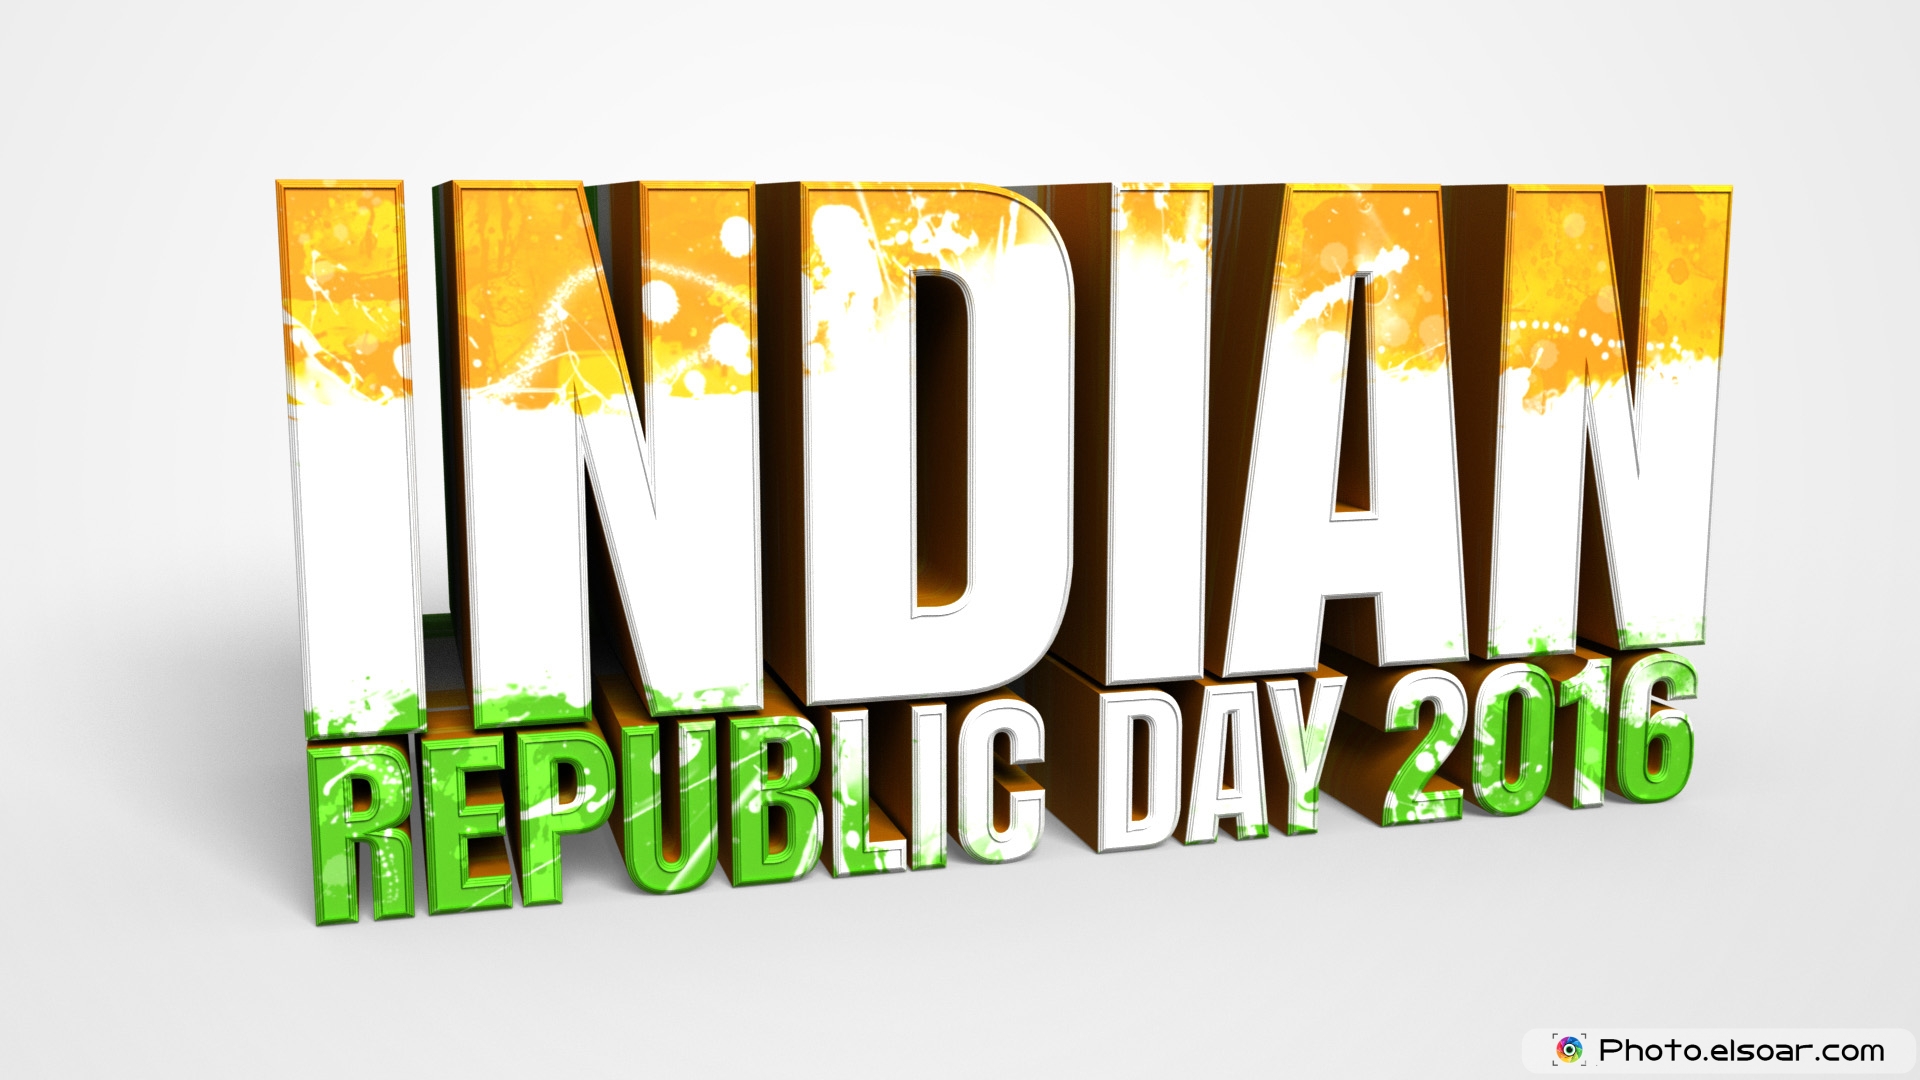 Happy Republic Day Of India 2016 Hd Wallpaper - Graphic Design , HD Wallpaper & Backgrounds